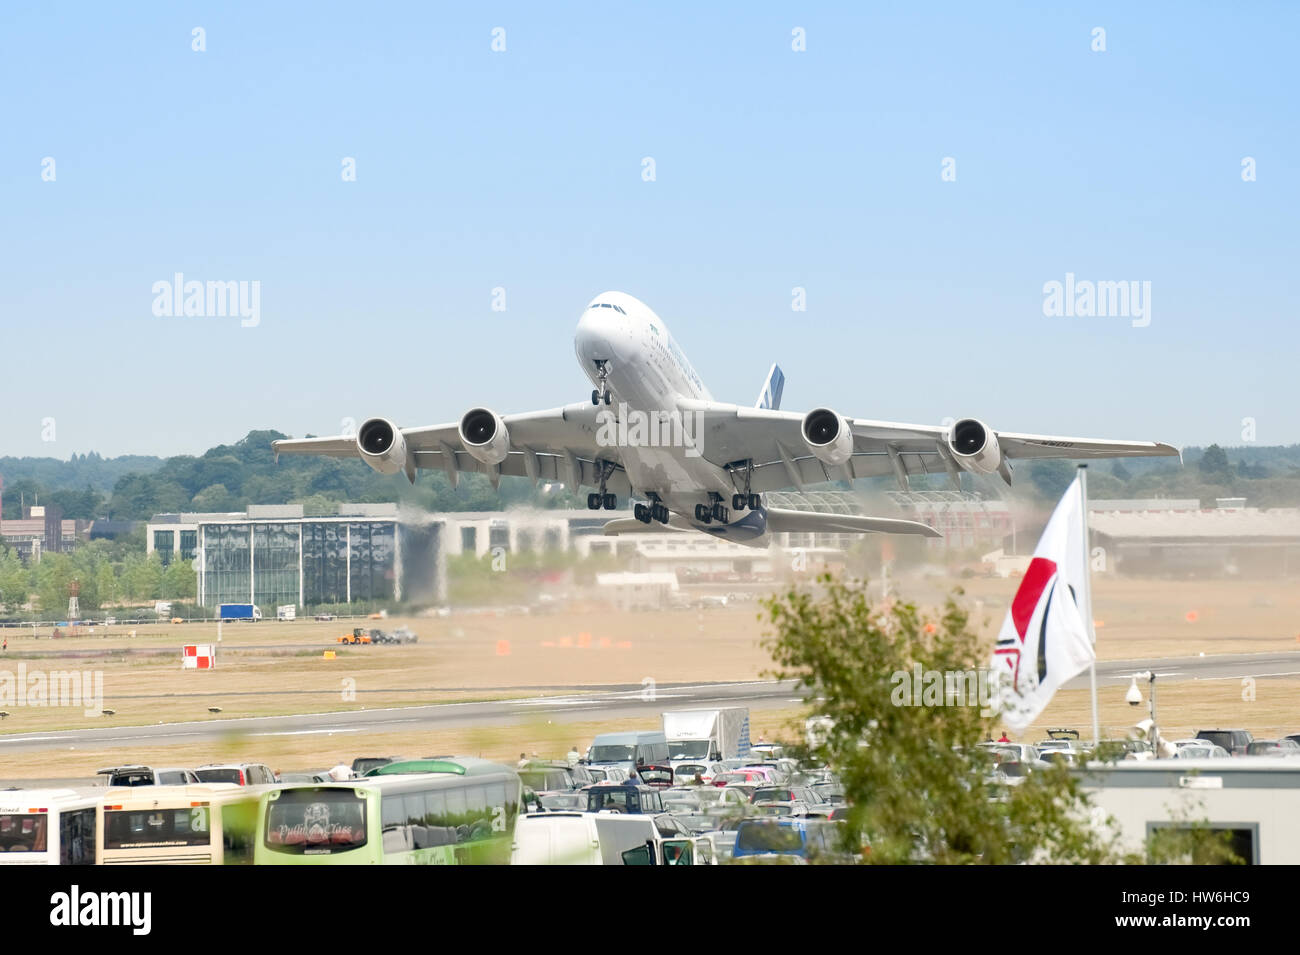 Airbus A380 jet airliner on take-off as part of the daily flying display at the Farnborough Airshow, UK Stock Photo